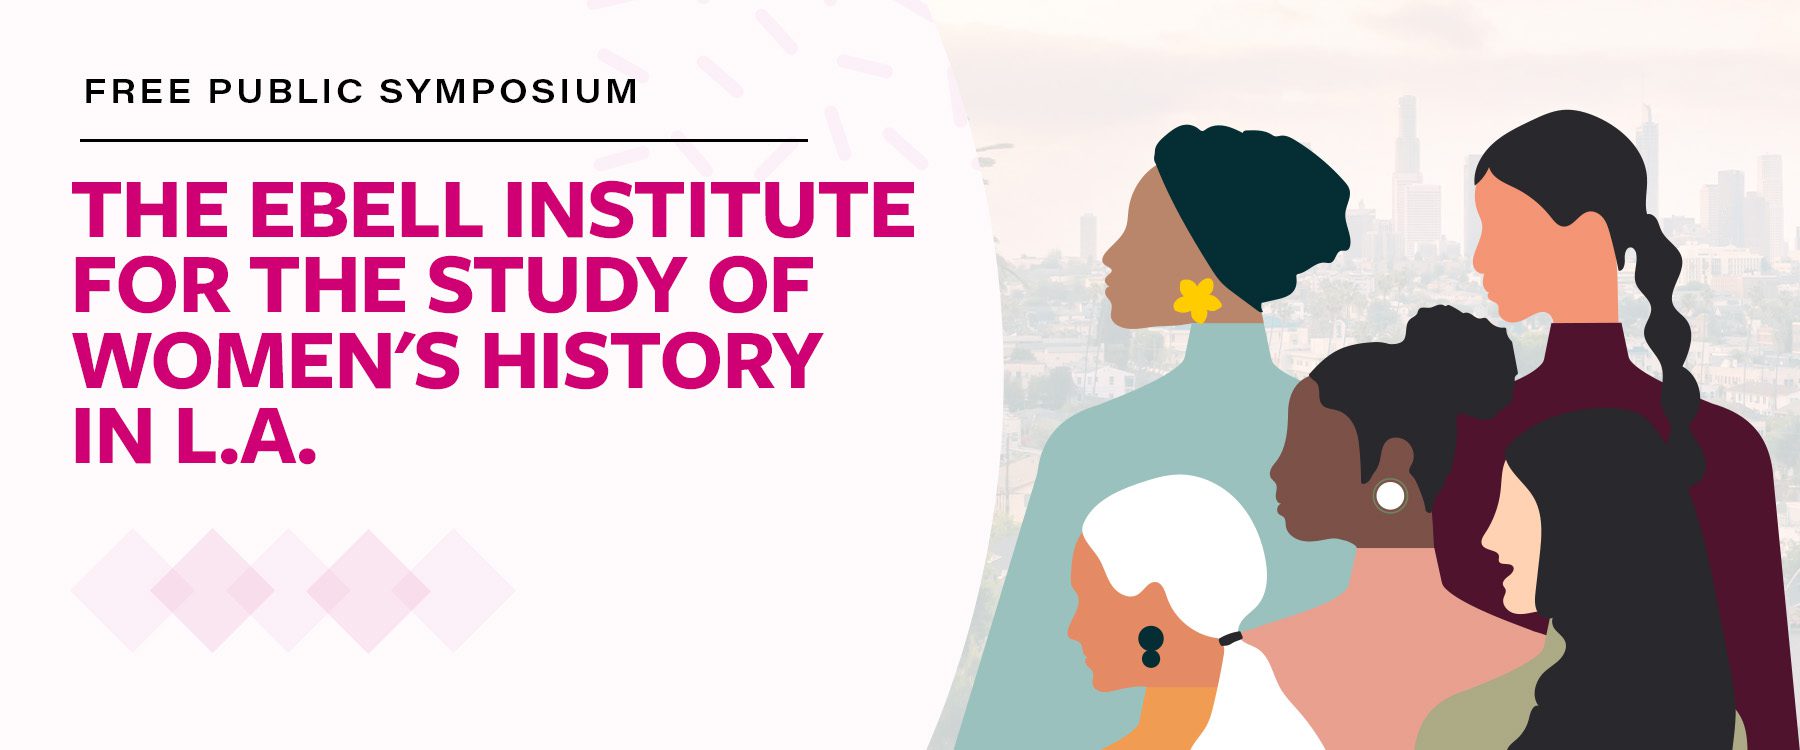 Free Public Symposium The Ebell Institute for the Study of Women's History in LA